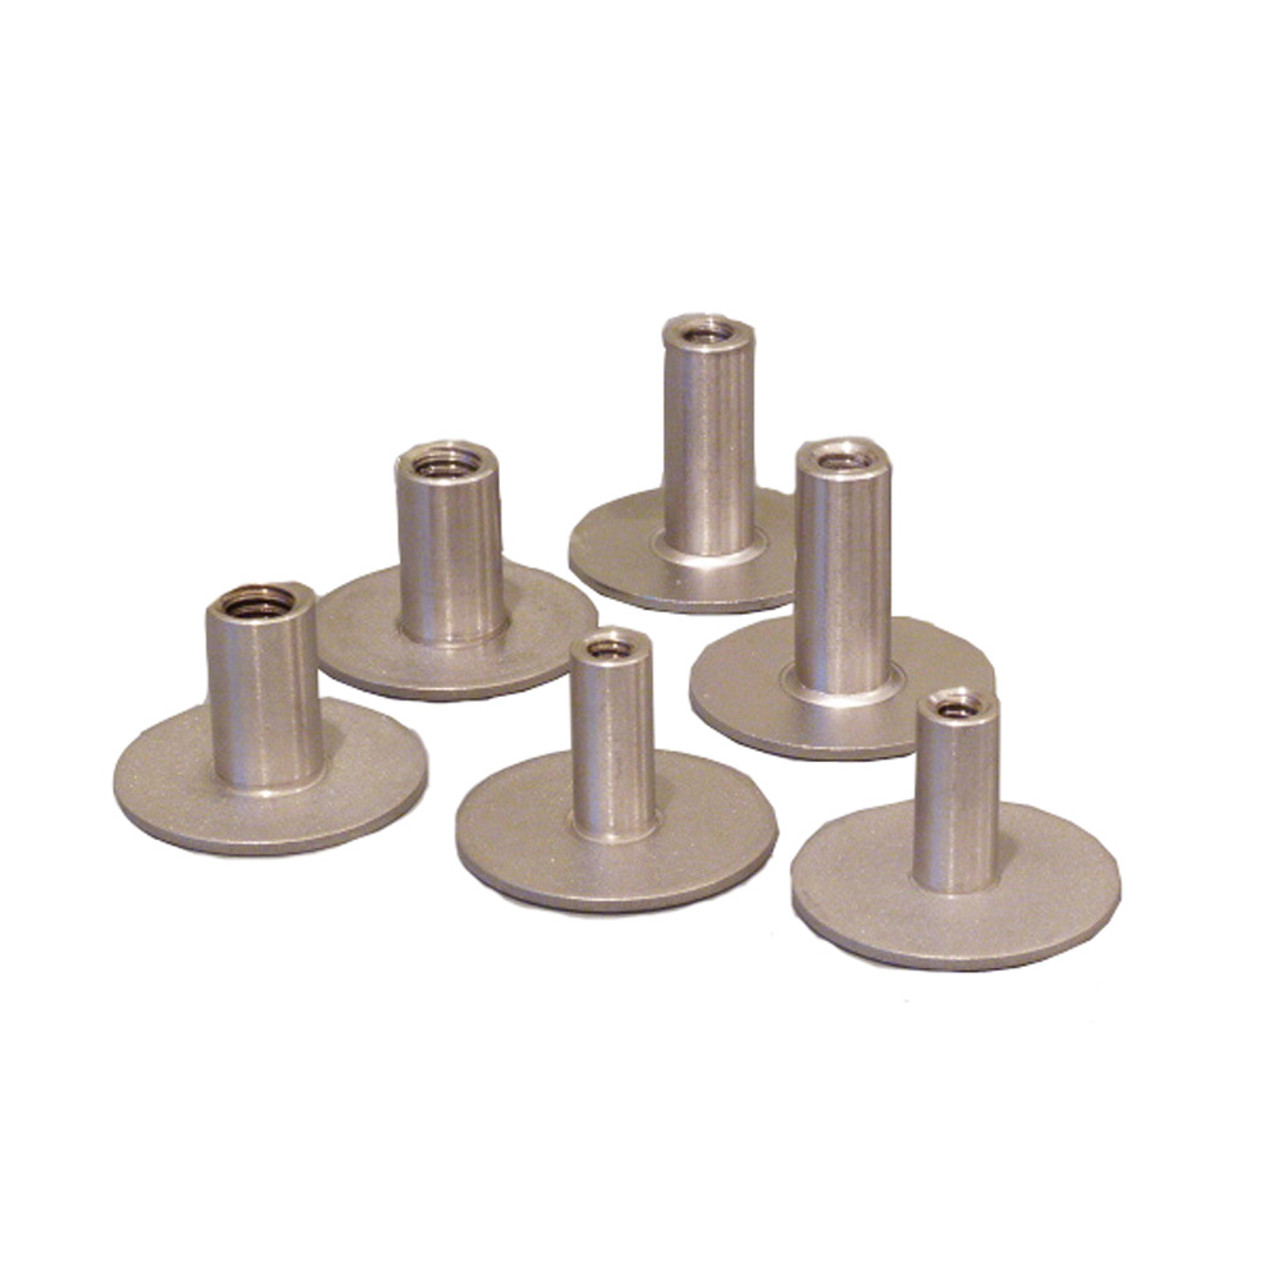 Weld Mount Stainless Studs  Weld Shear Connector/on Threaded Studs